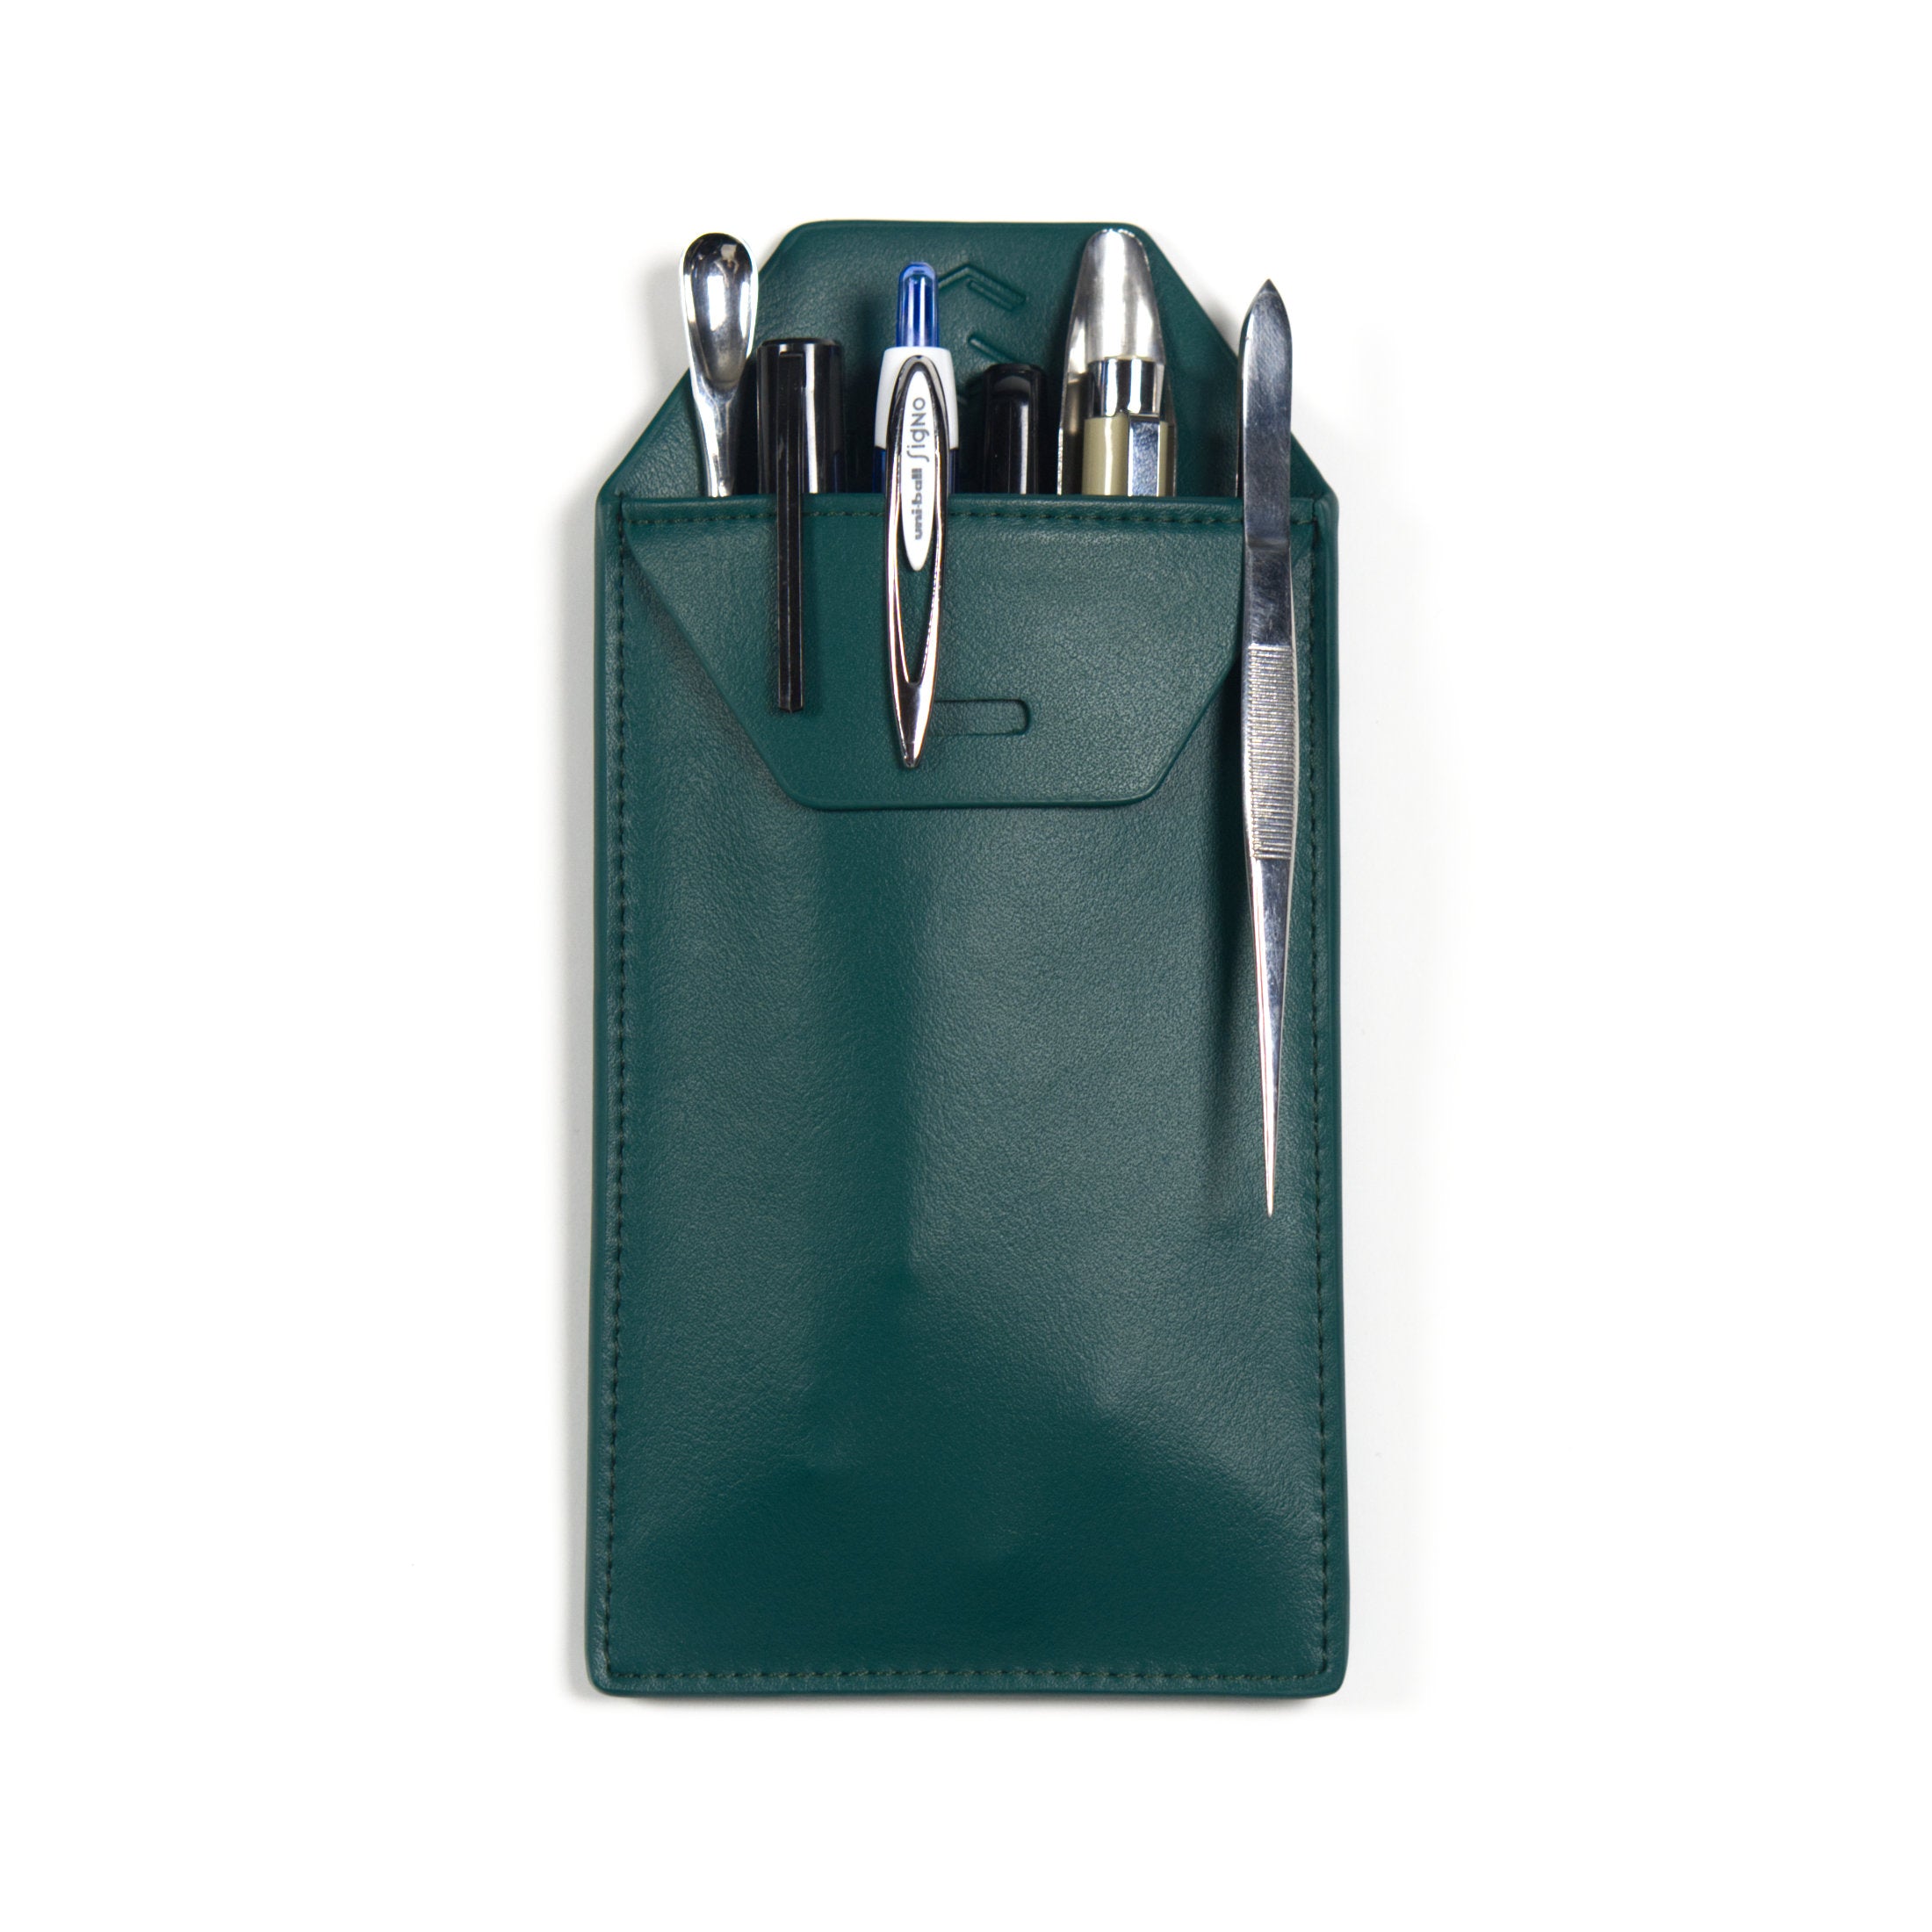 Pocket Protector for Lab Coats Spruce Green